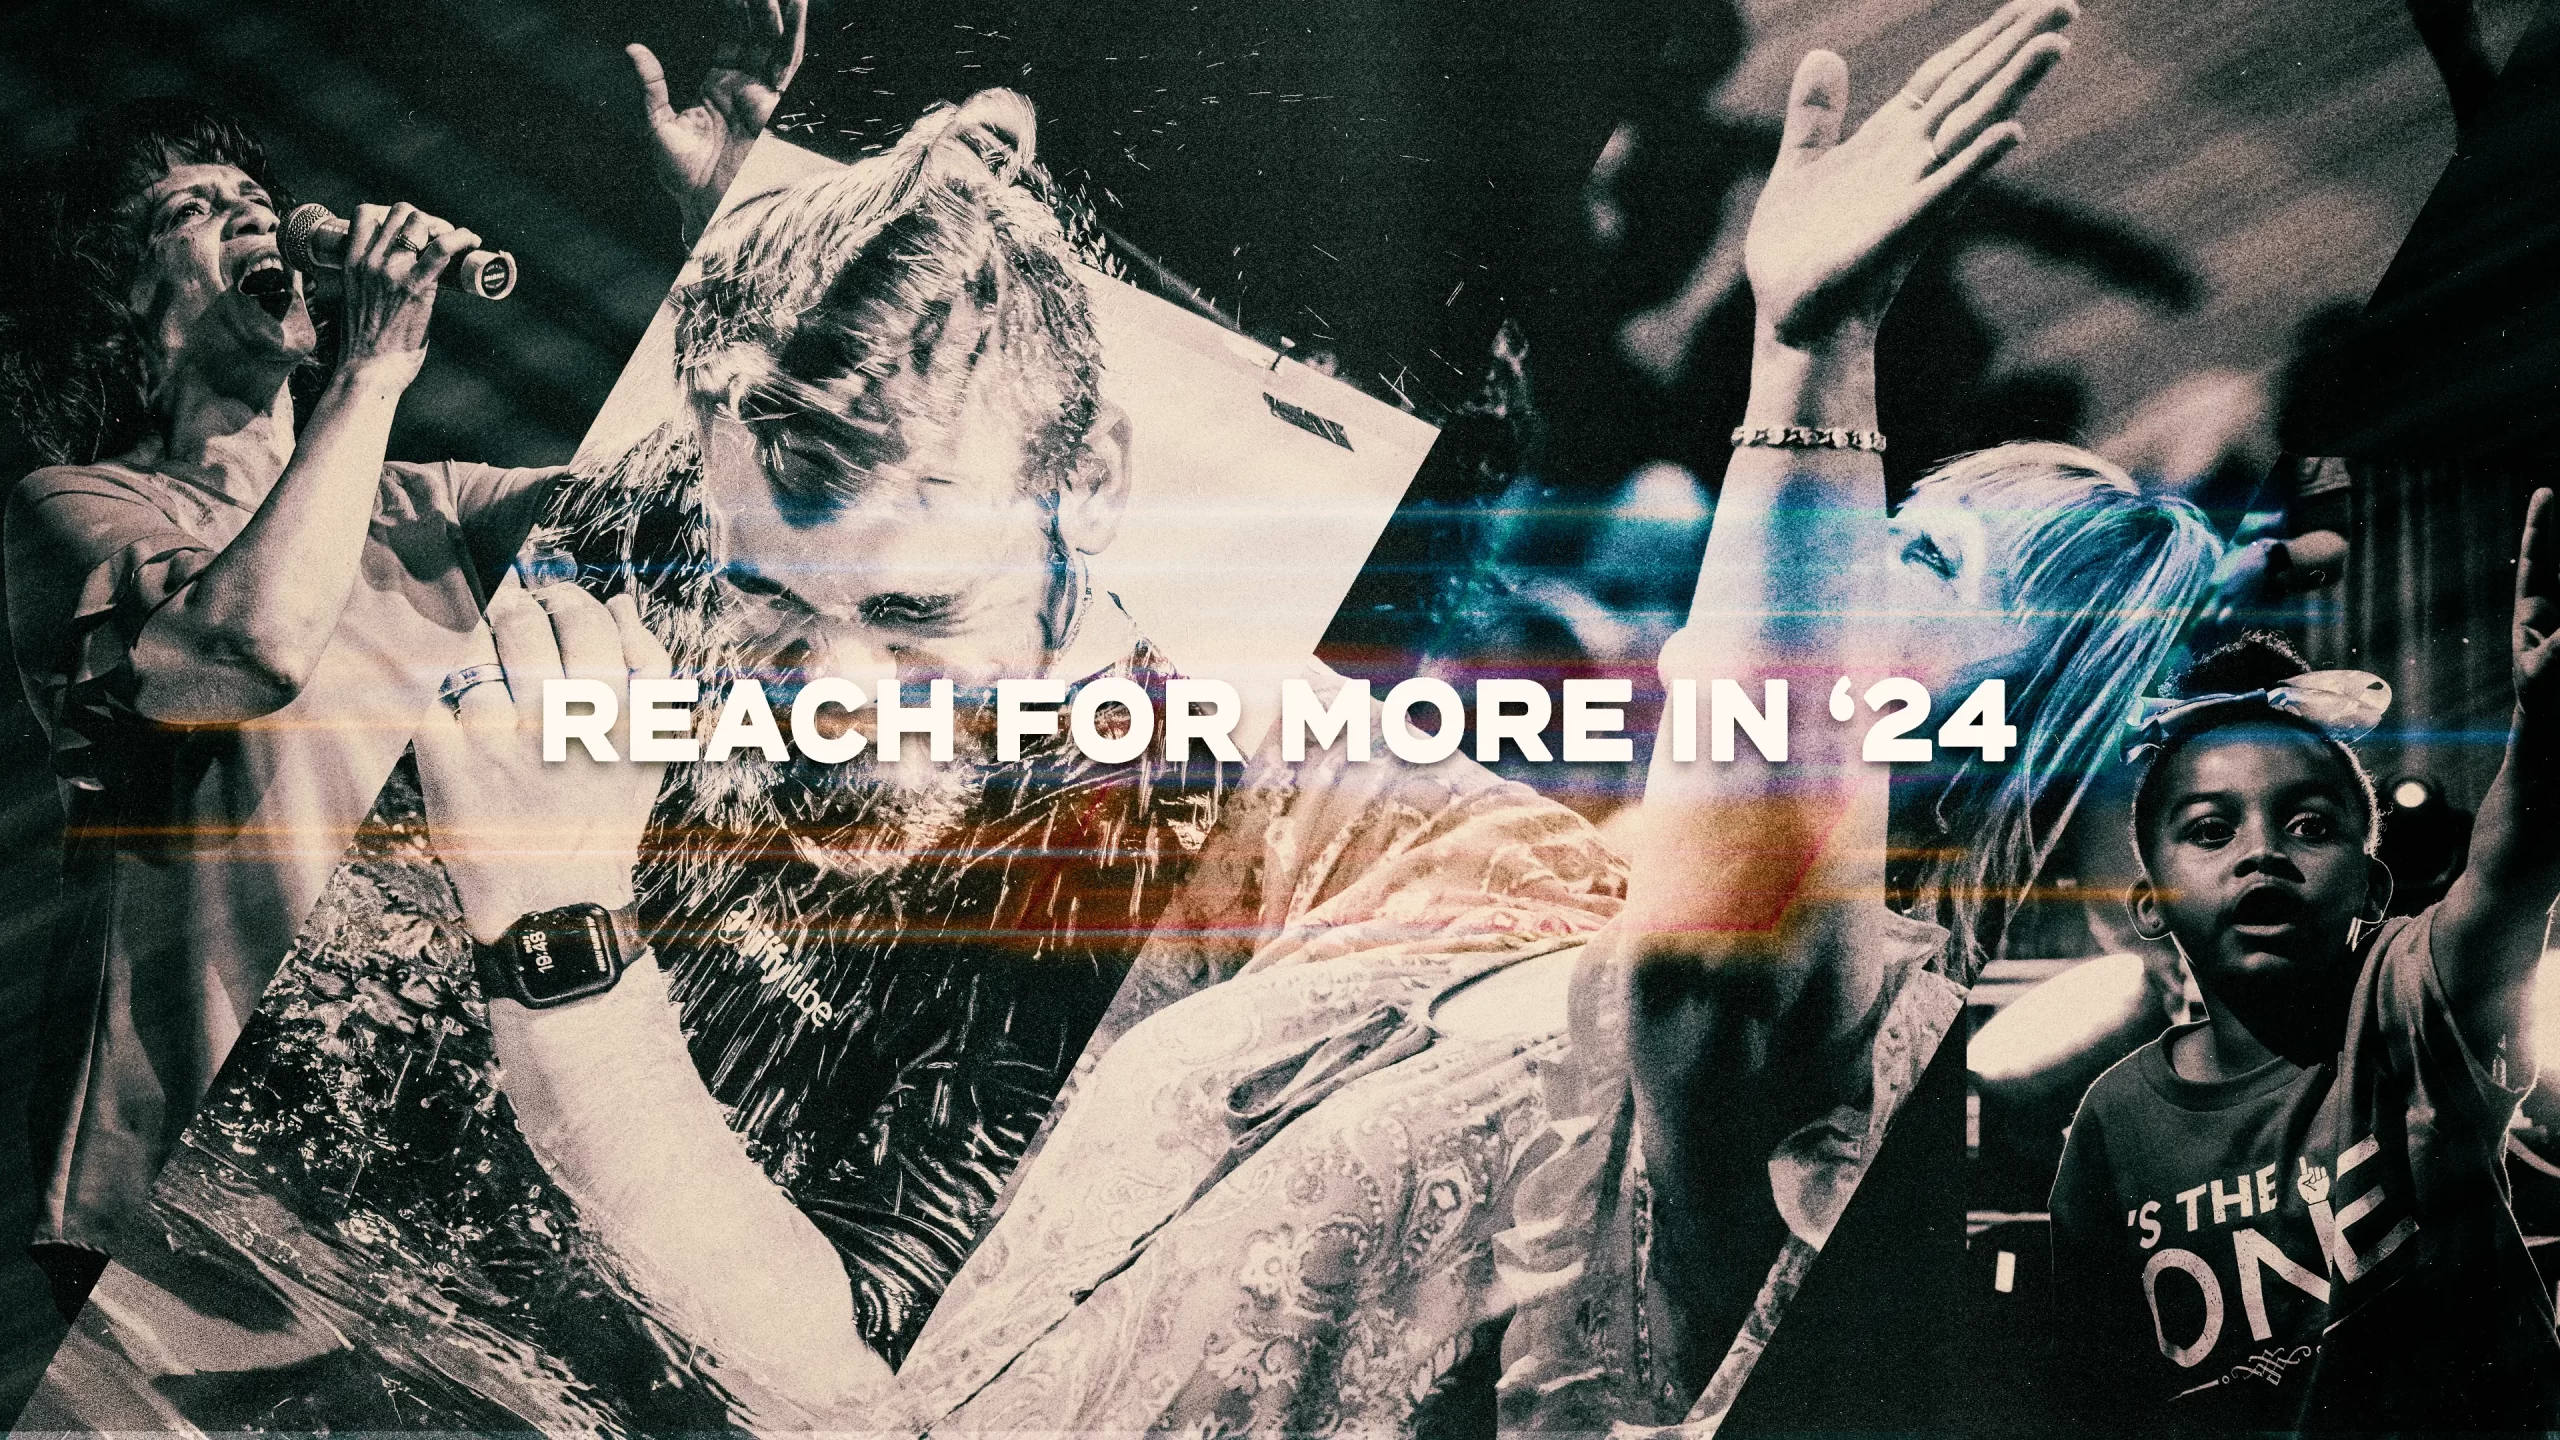 Reach for more in 24